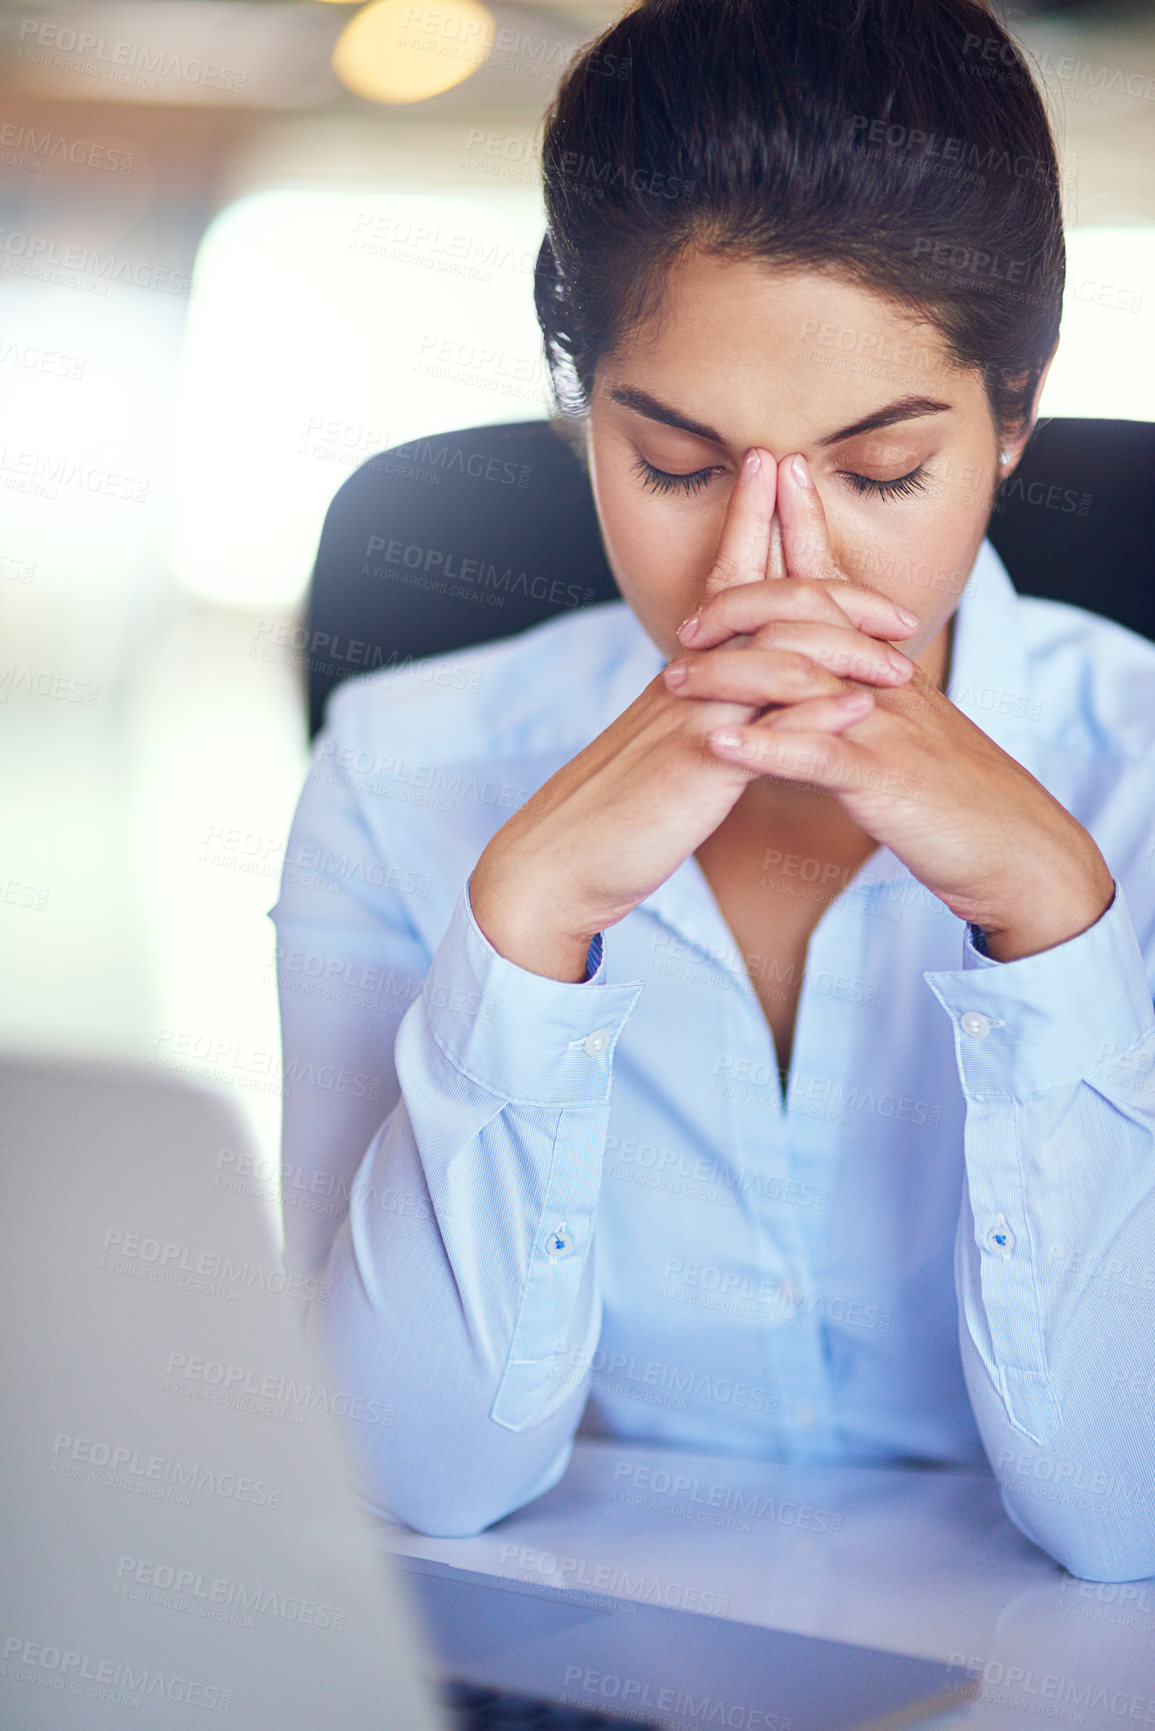 Buy stock photo Shot of a young businesswoman looking stressed while sitting at her desk